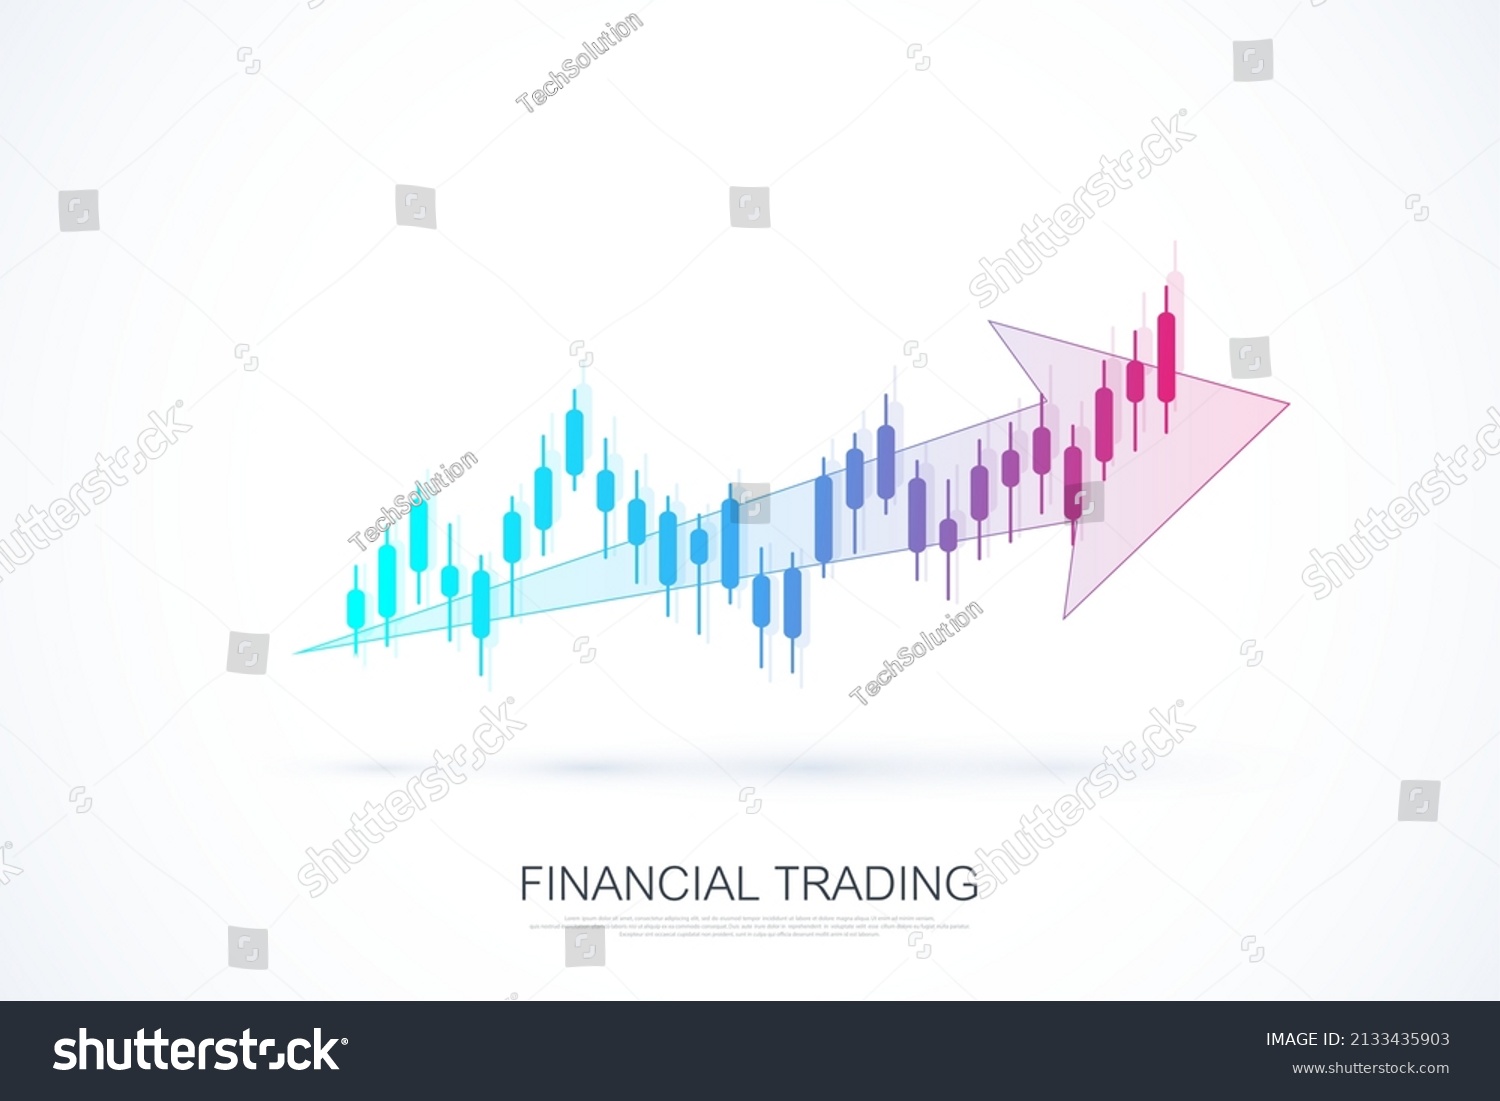 SVG of Stock market or forex trading graph in futuristic concept for financial investment or economic trends business idea. Financial trade concept. Stock market and exchange Candle stick graph chart vector svg